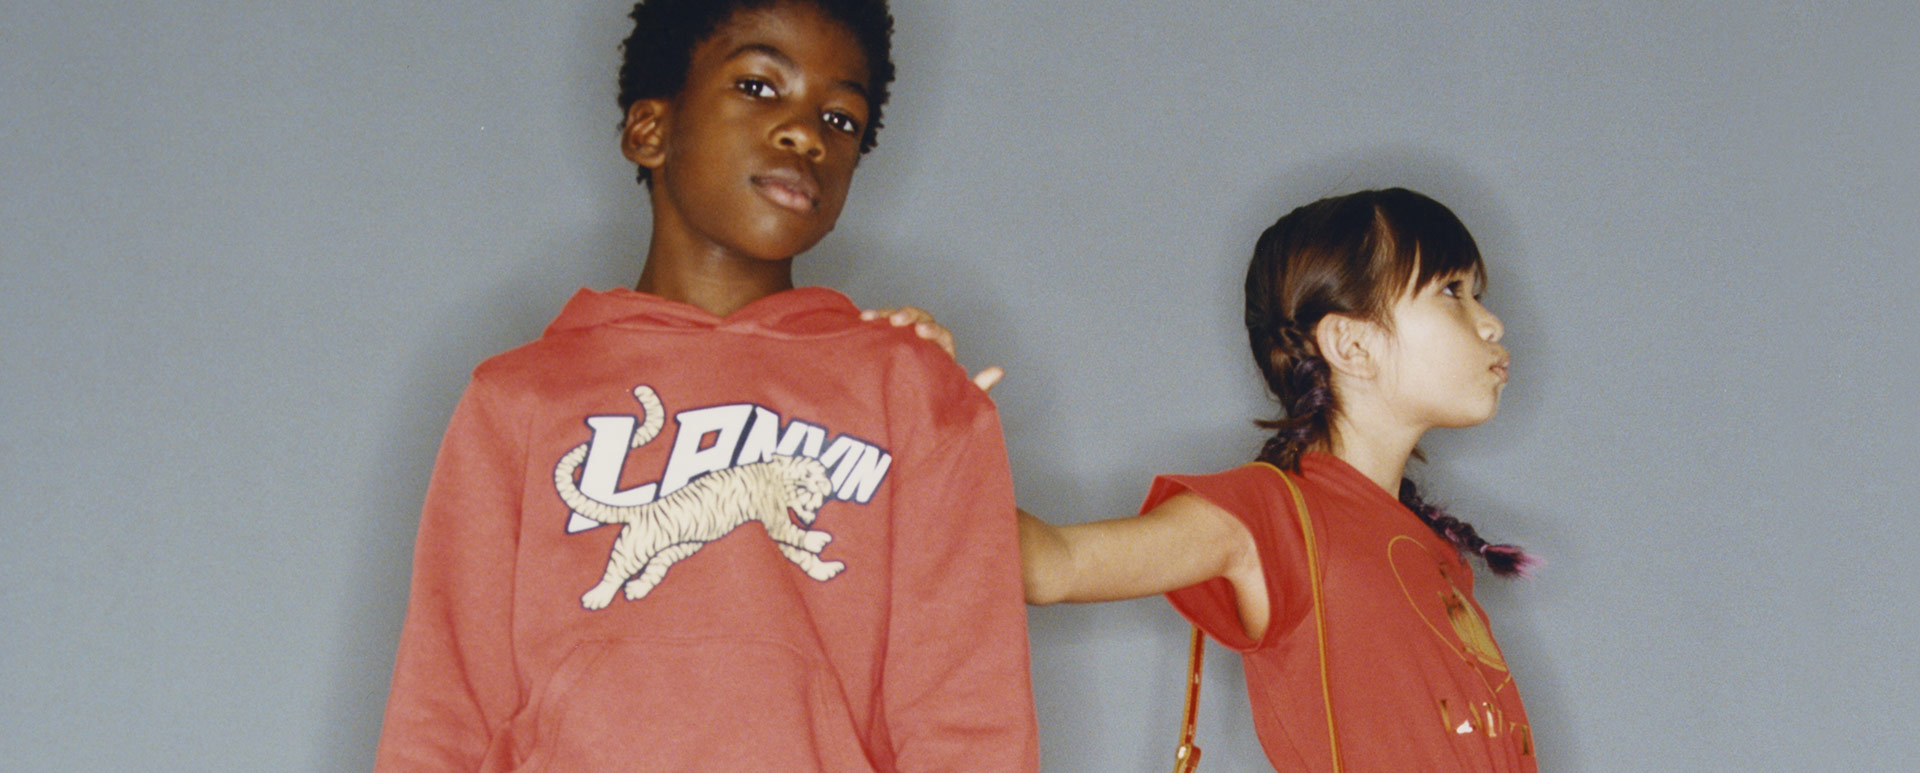 luxury children's clothing for girls and boys from the Lanvin brand